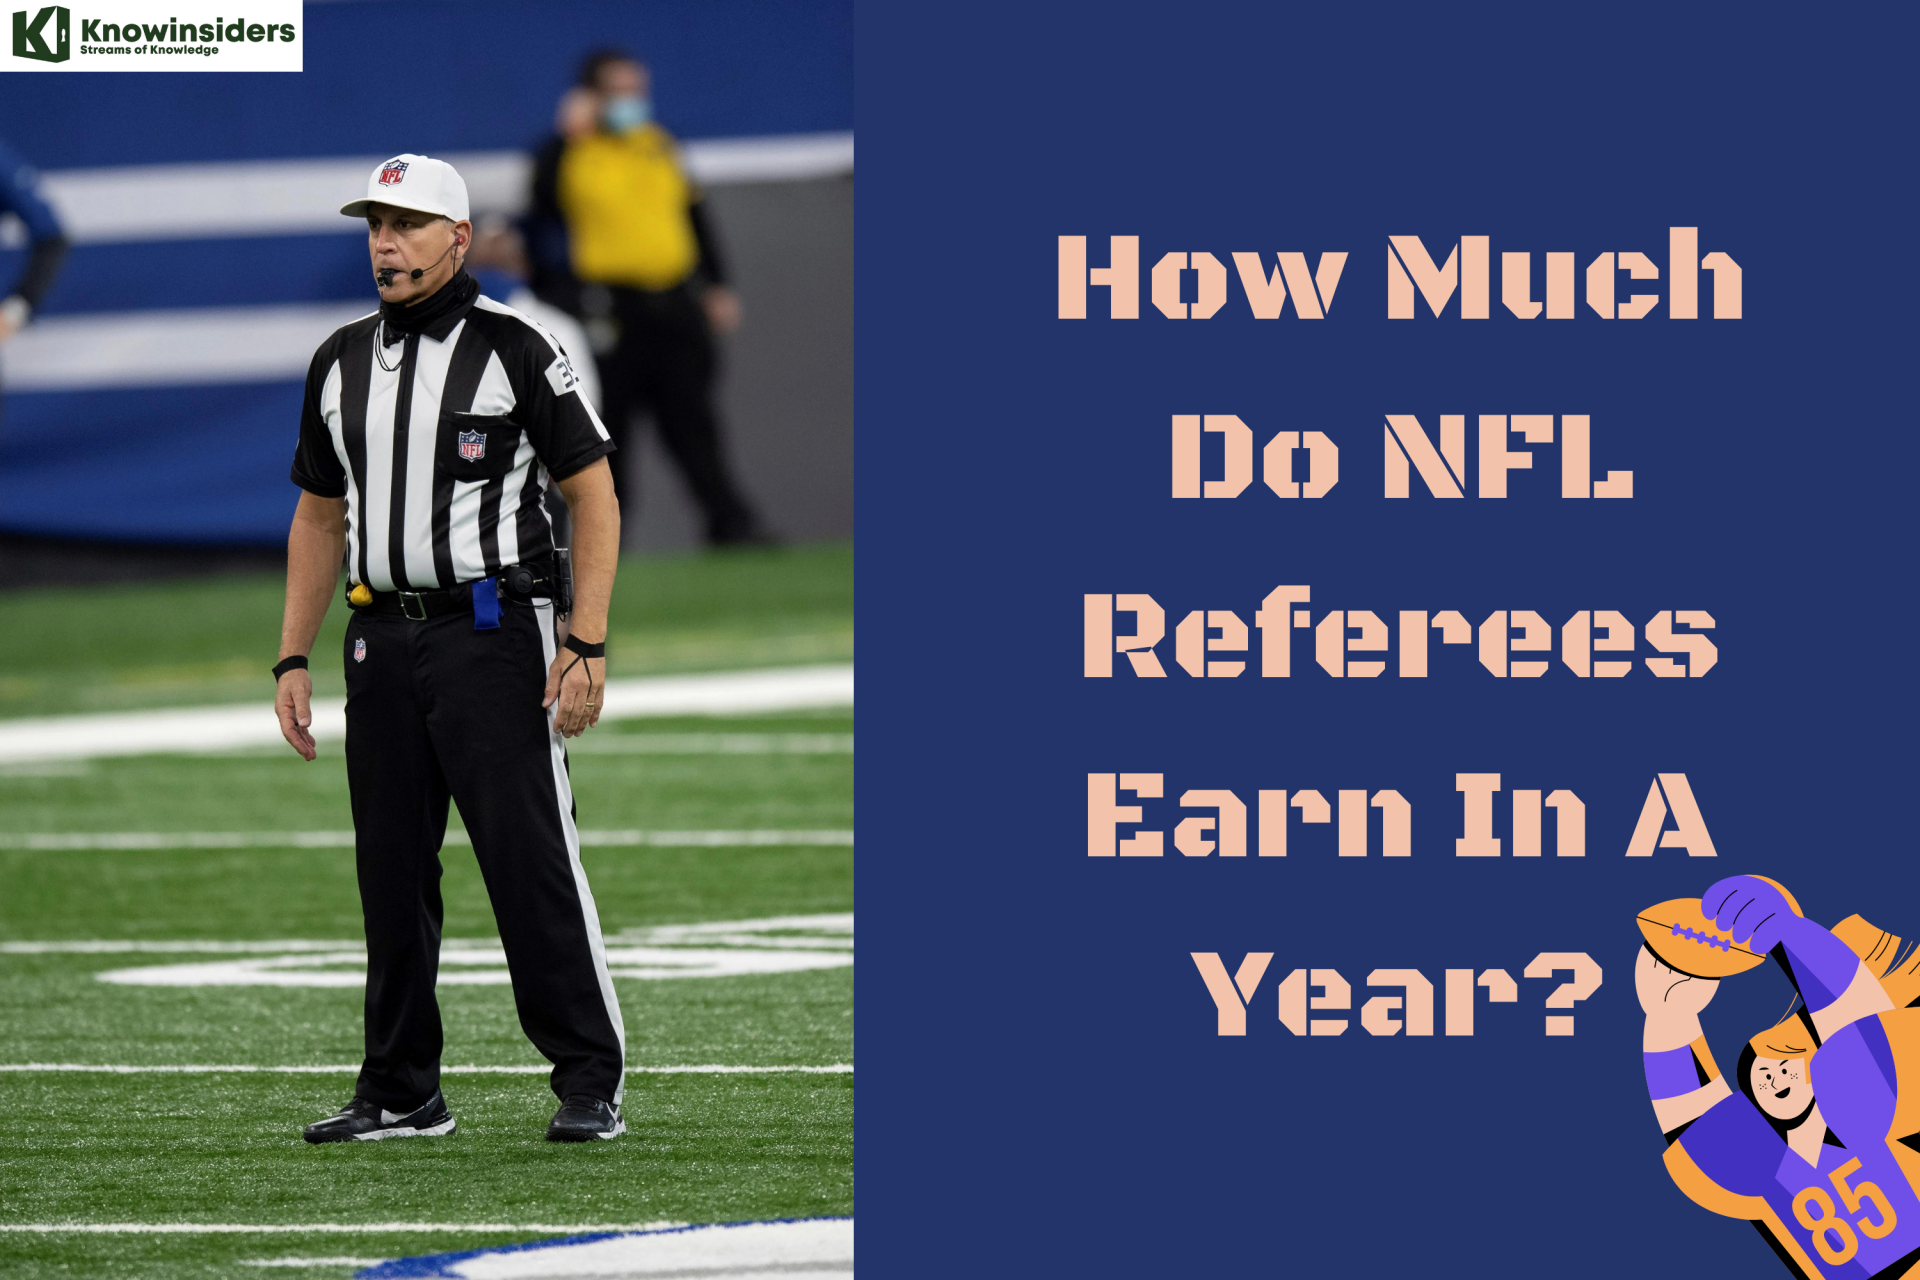 How Much Do NFL Referees Earn In A Year? | KnowInsiders